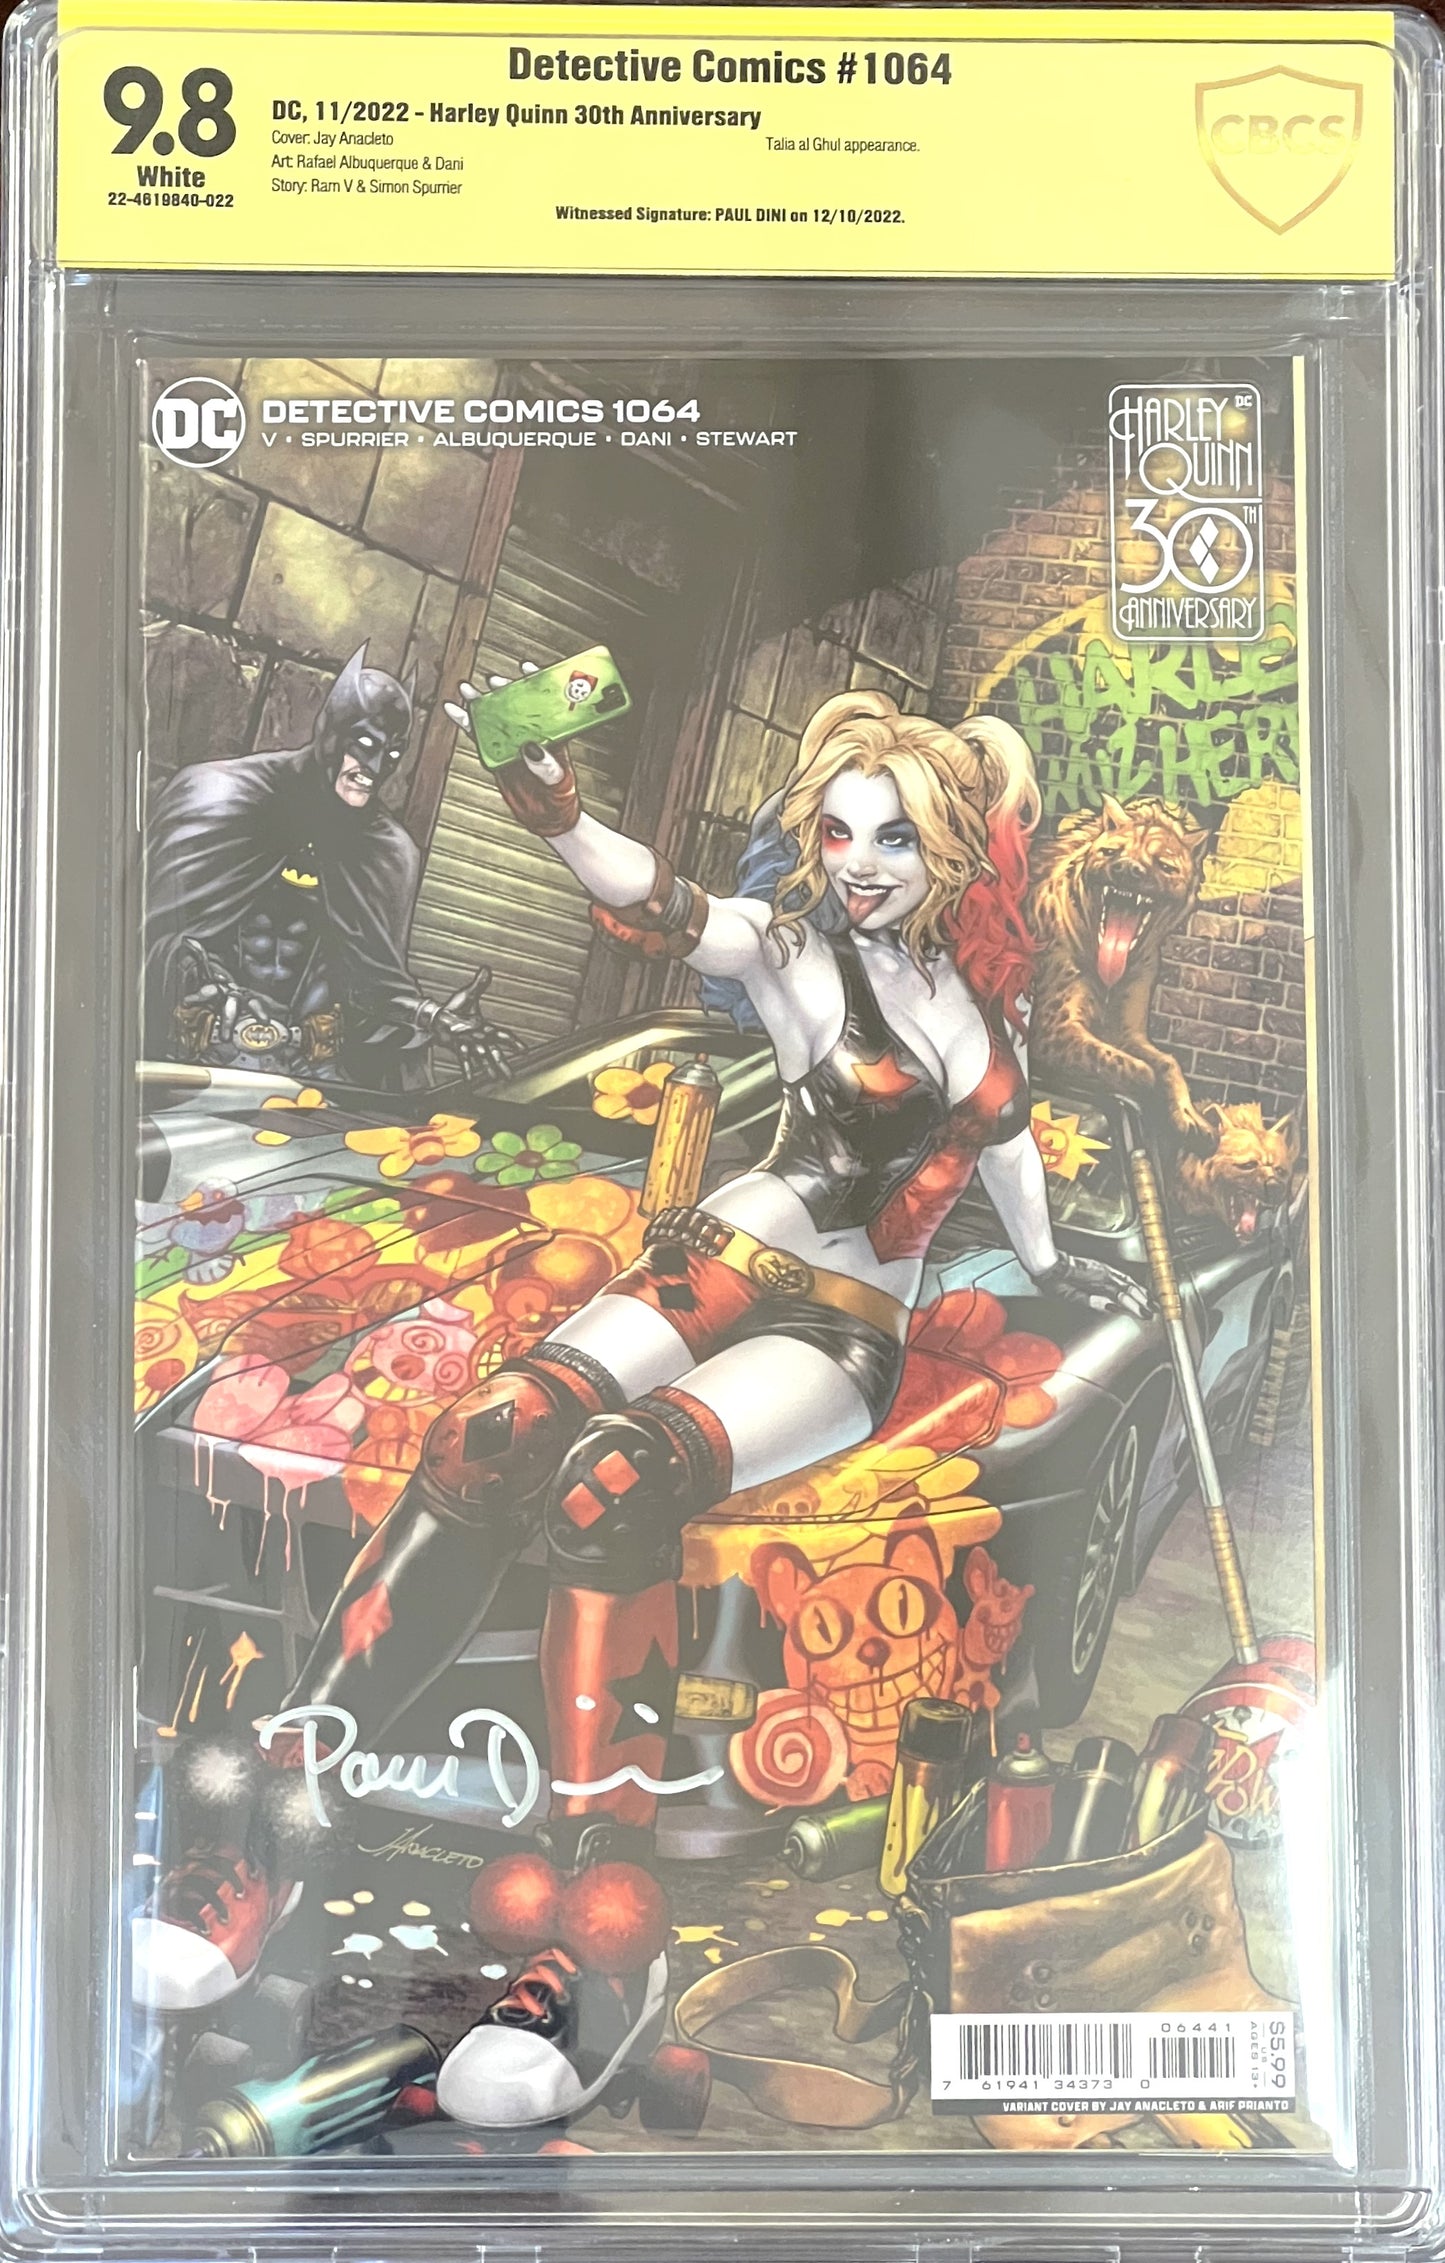 Detective Comics #1064 Harley Quinn Variant. Signed by Paul Dini. CBCS 9.8.